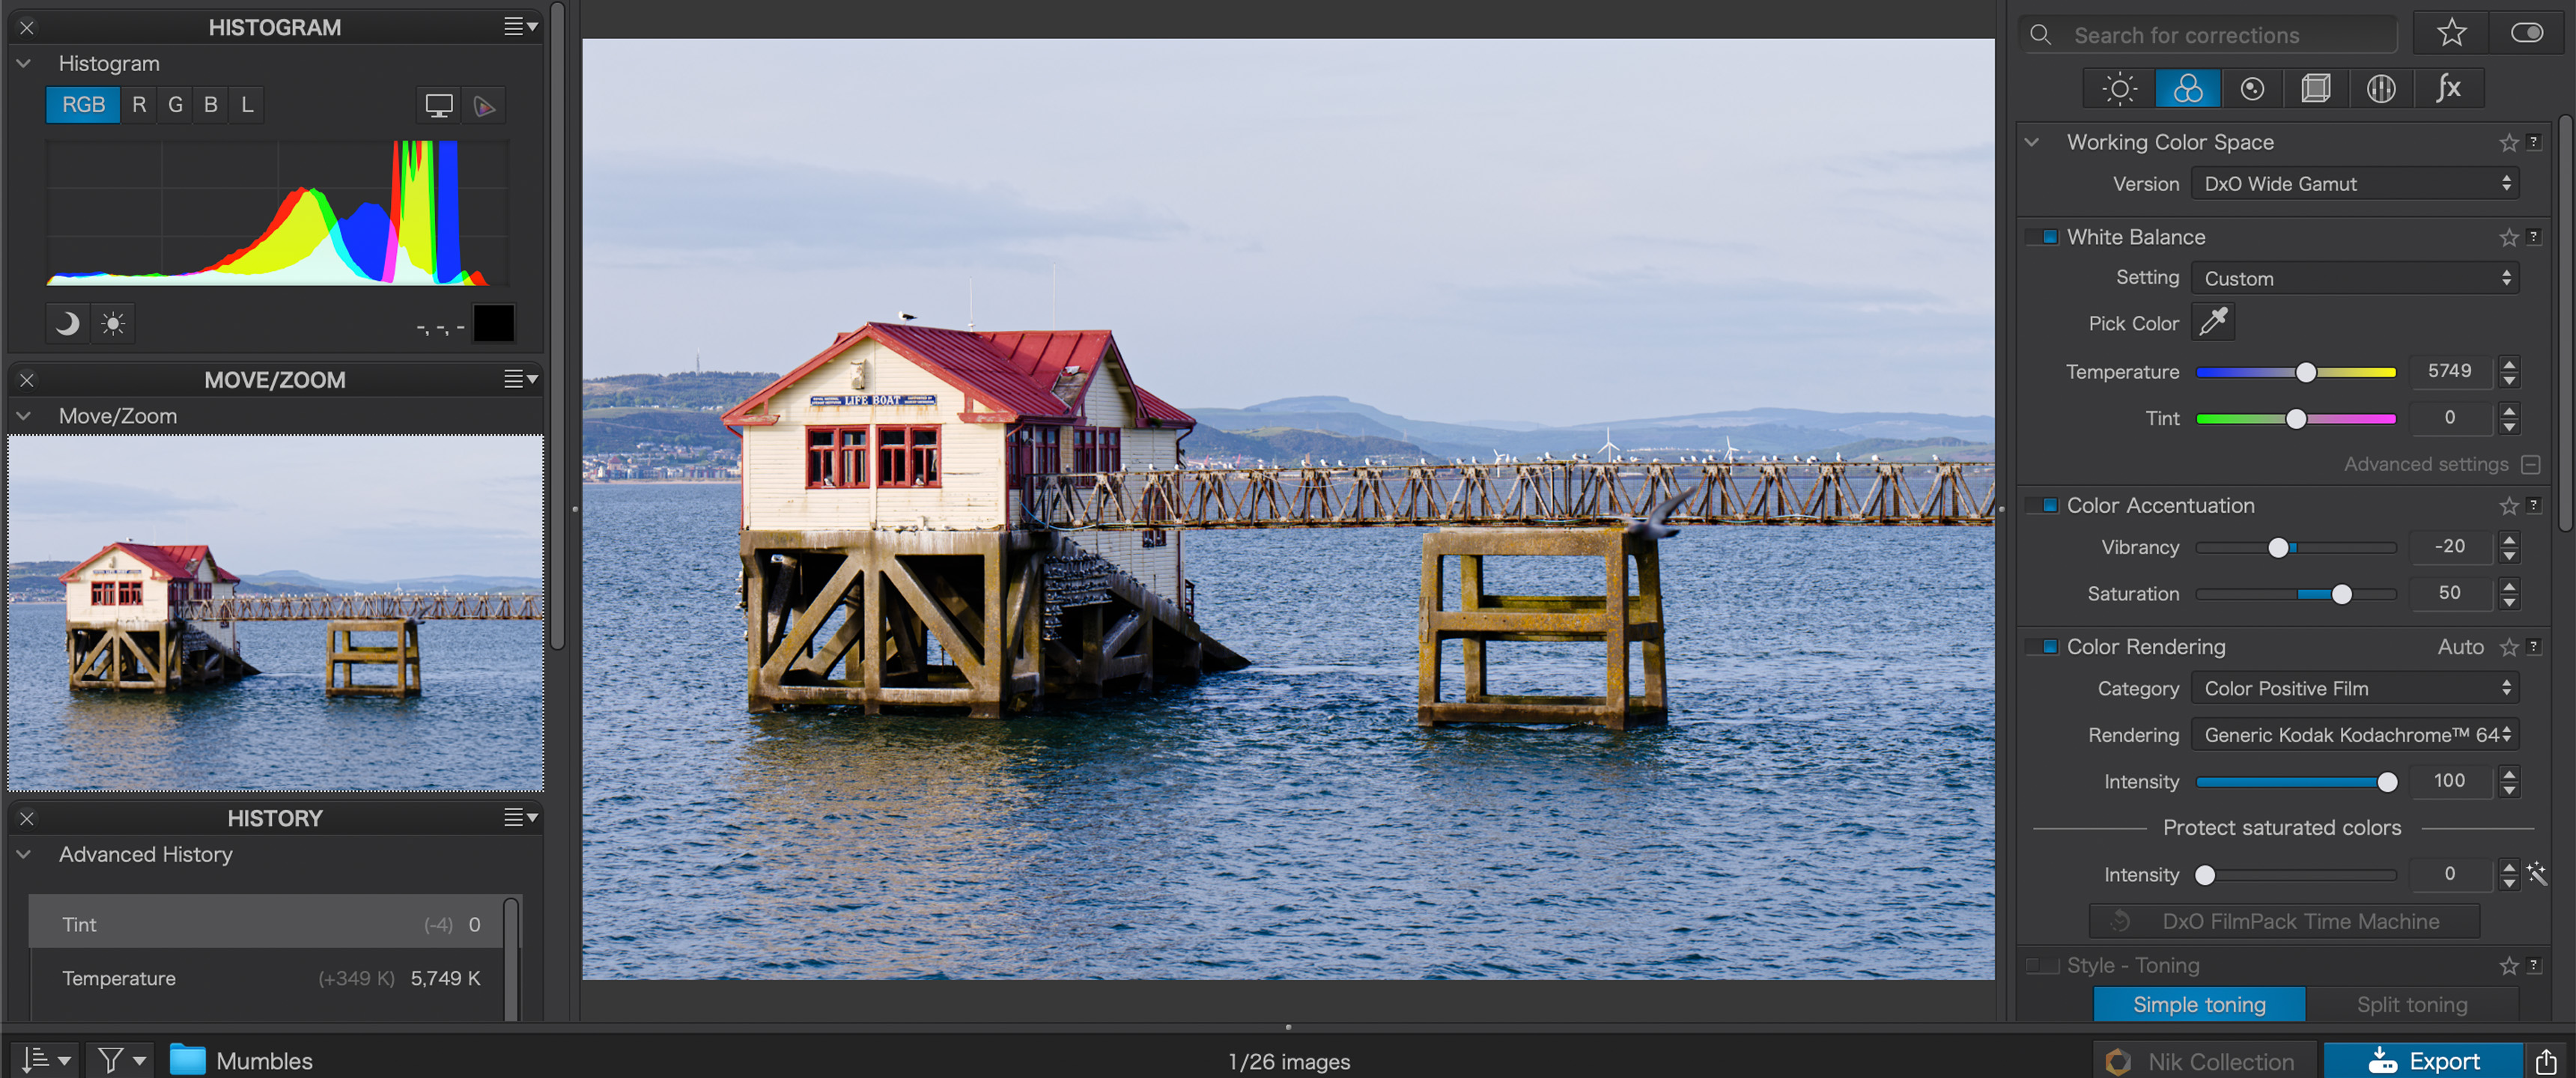 download the new version for windows DxO PhotoLab 7.1.0.94